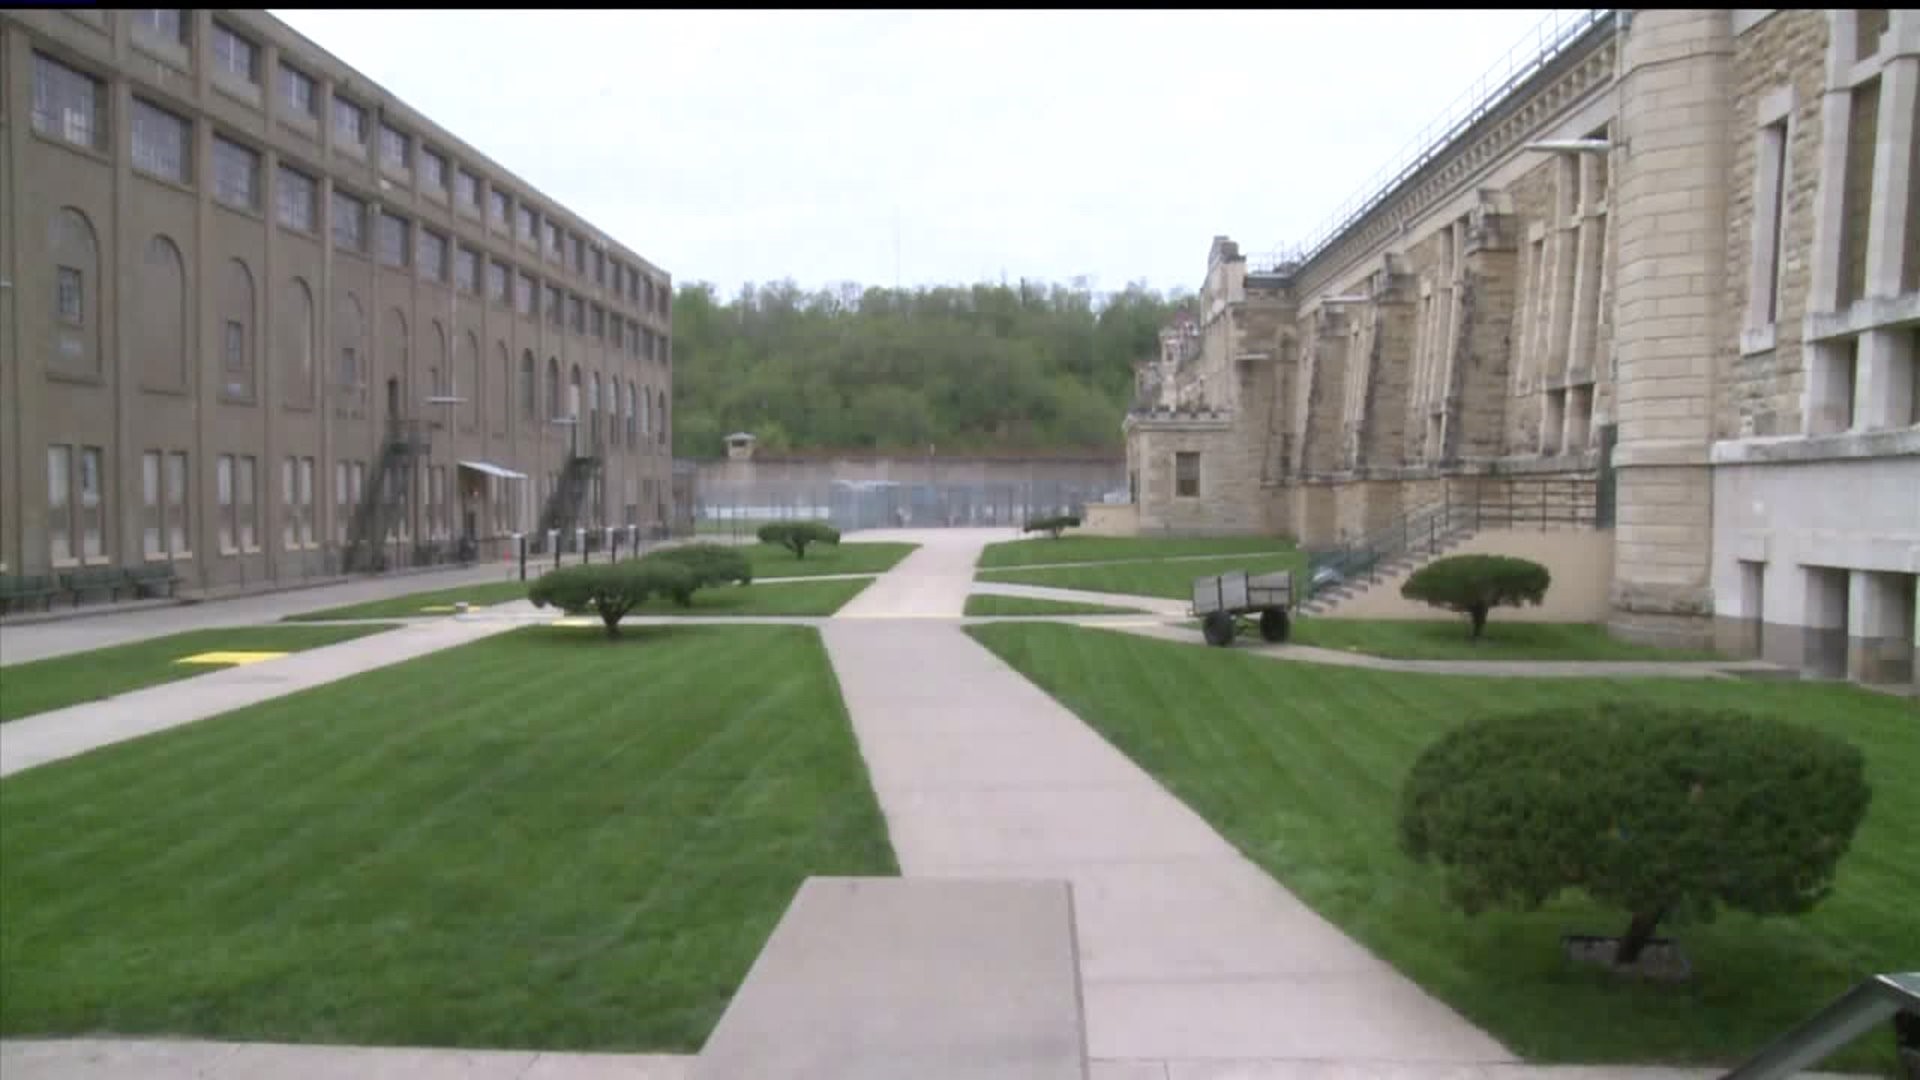 Nonprofit group looks to save abandoned Iowa prison